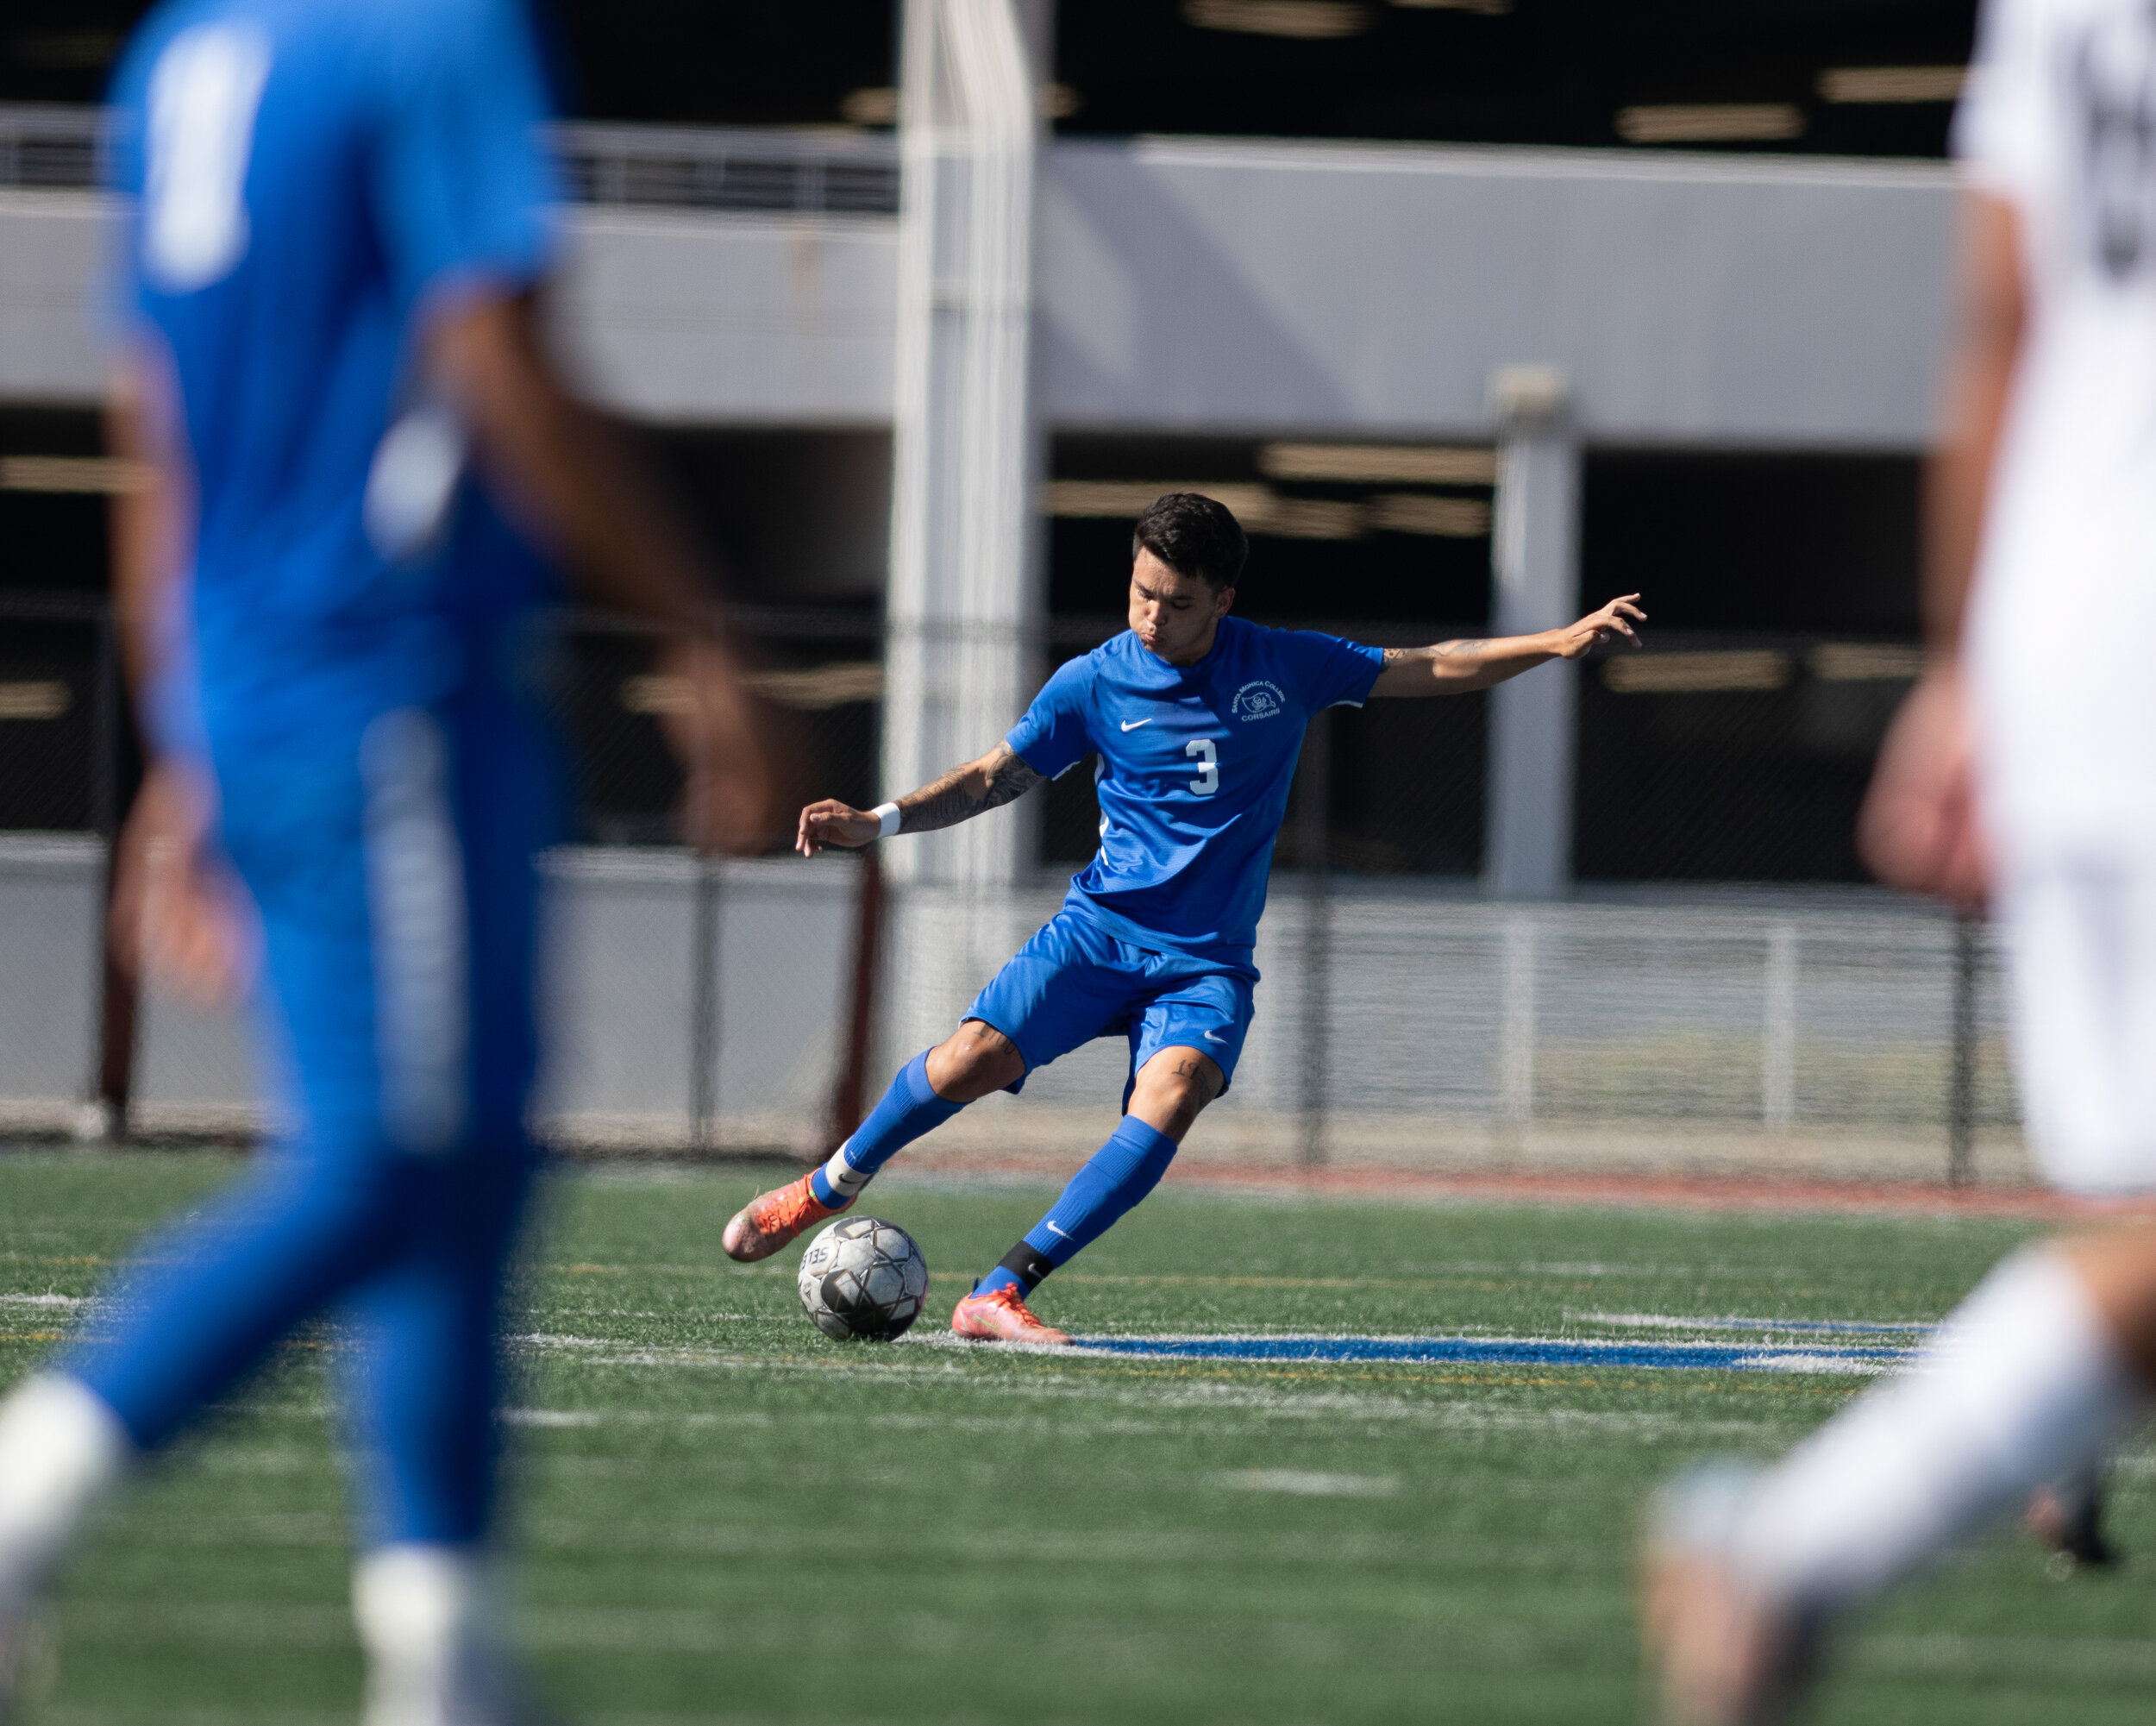  SMC sophomore Kevin Clavel (3) kicks the ball downfield to his open player on September 21, 2021 at Santa Monica College in Santa Monica, Calif. (Jon Putman | The Corsair) 